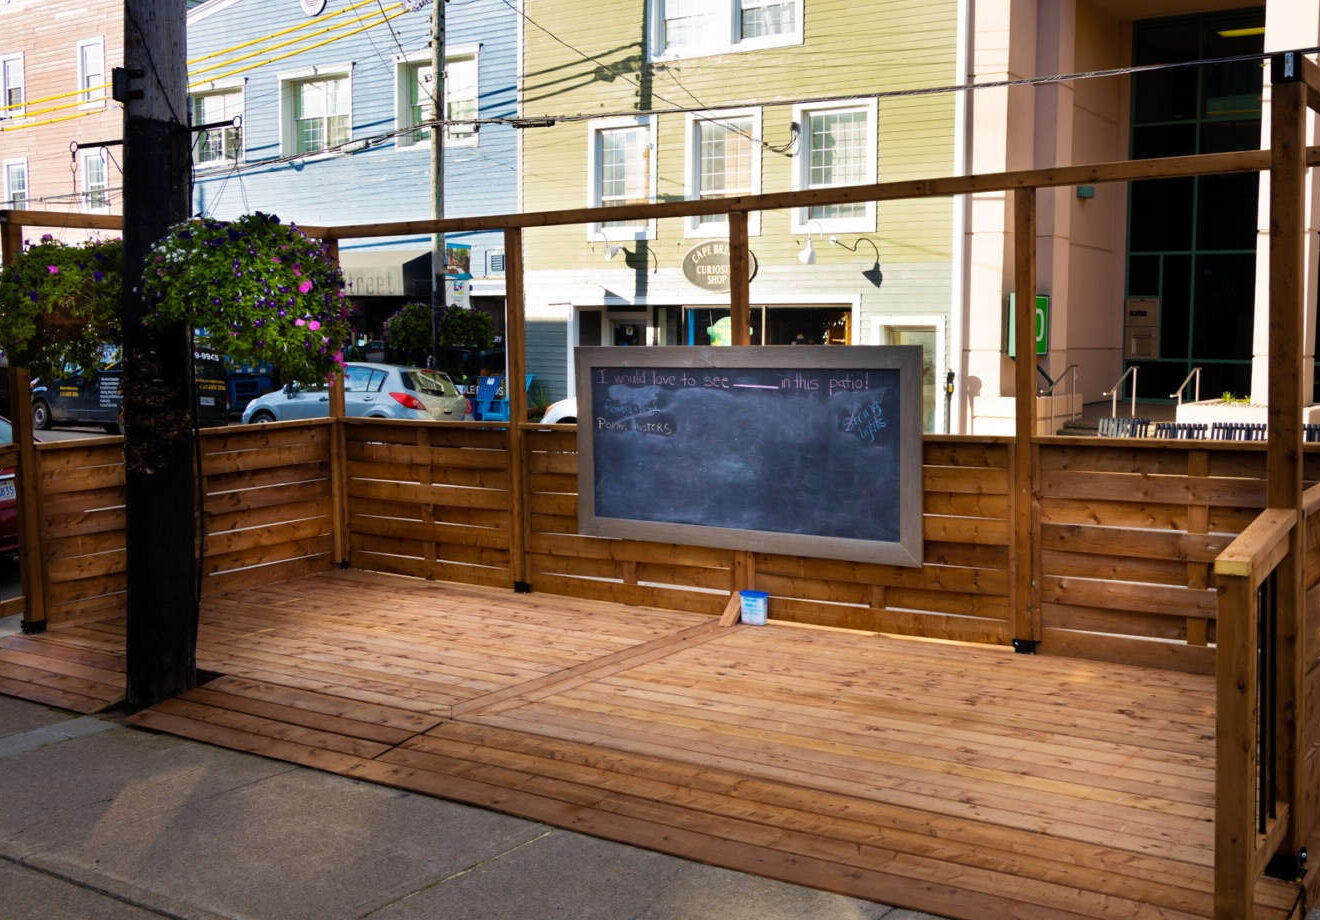 Wooden patio off of sidewalk and into the street in downtown setting